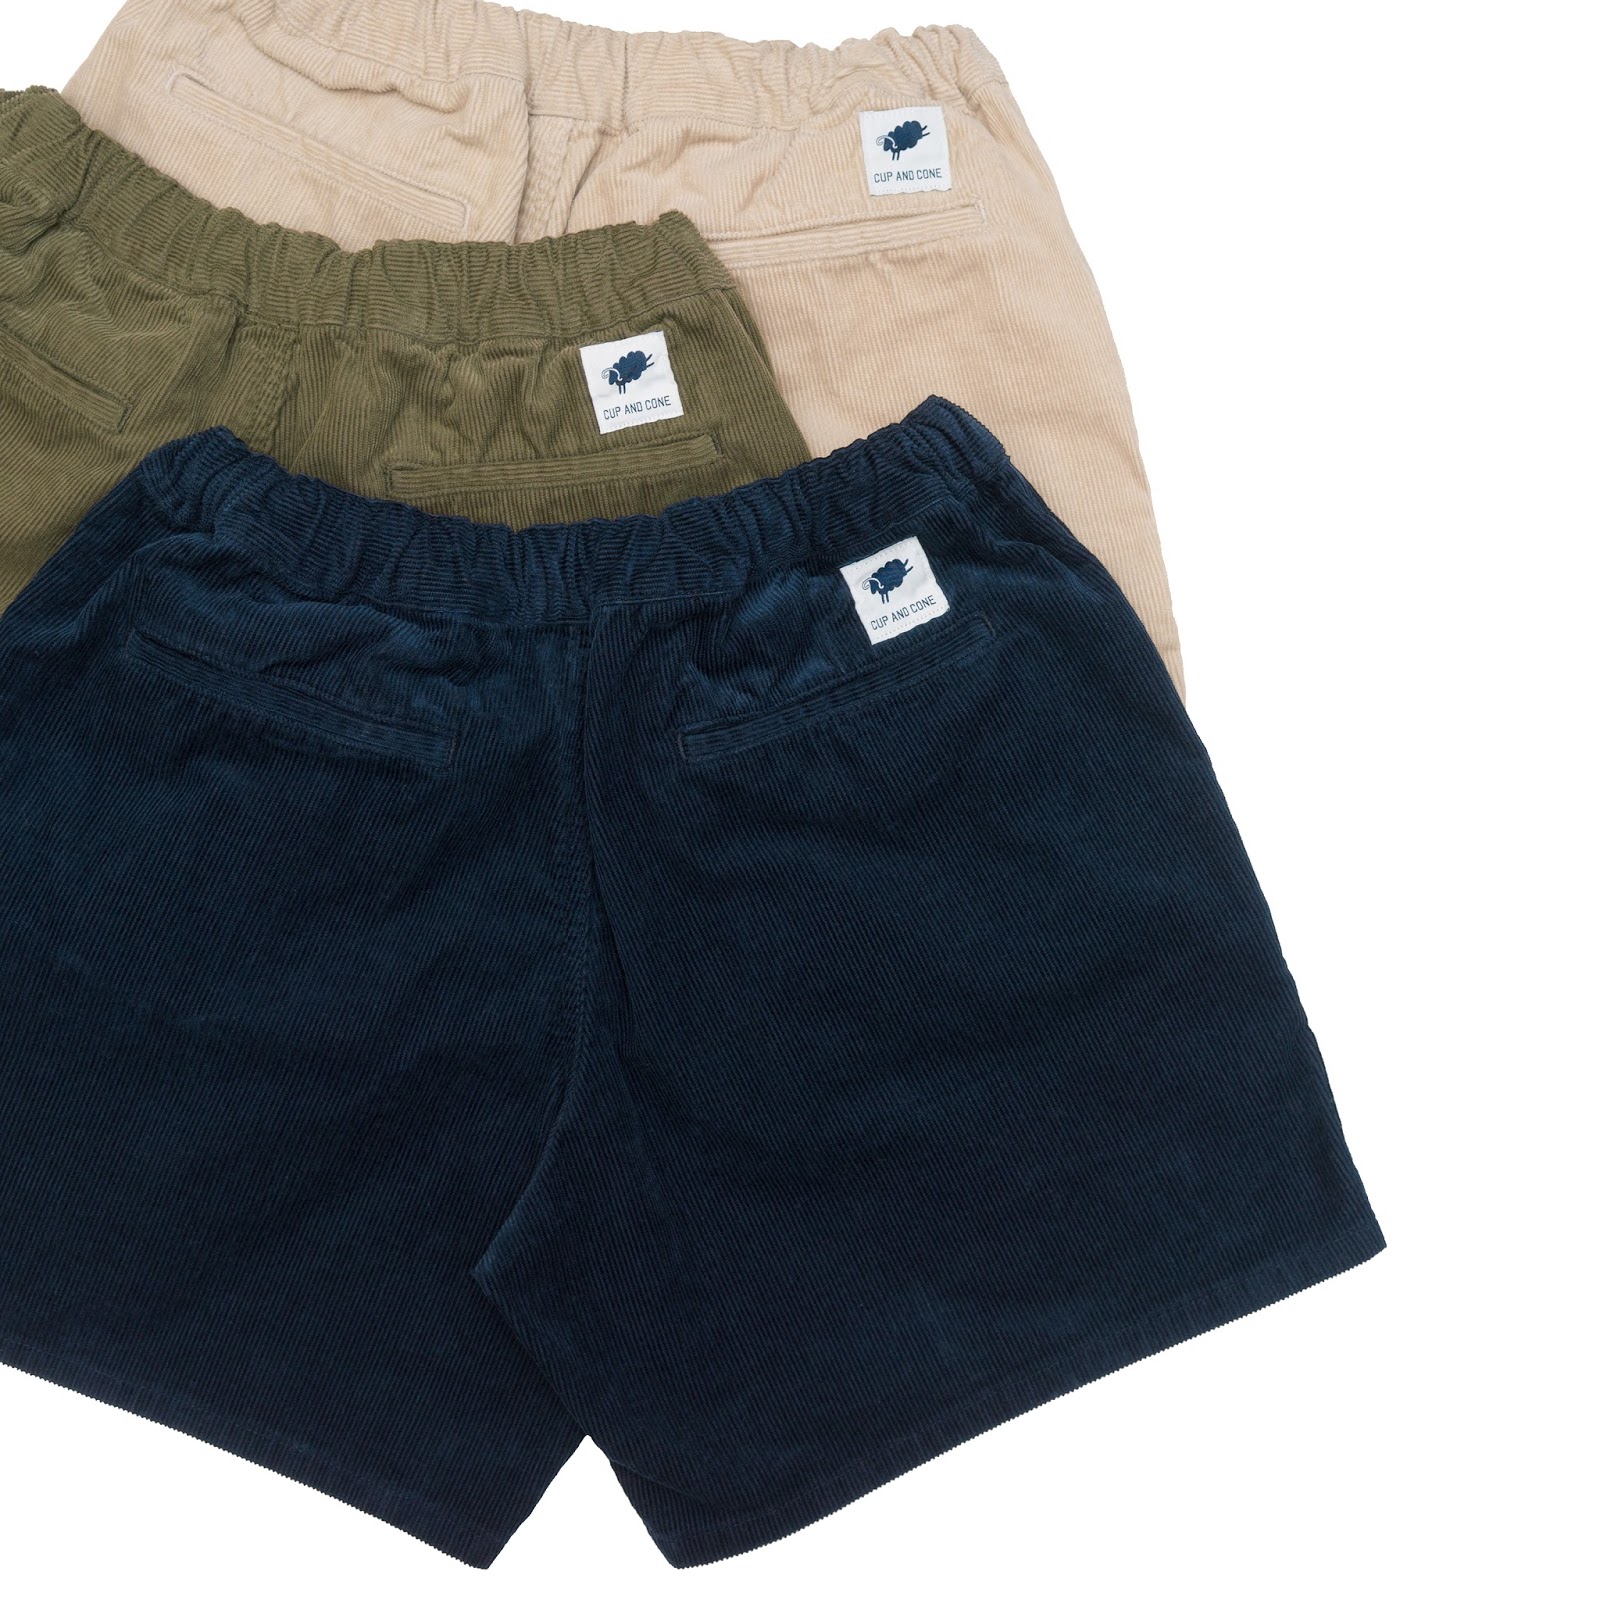 CUP AND CONE: Corduroy Baggy Shorts, Hands Tee & 8YRS Tee